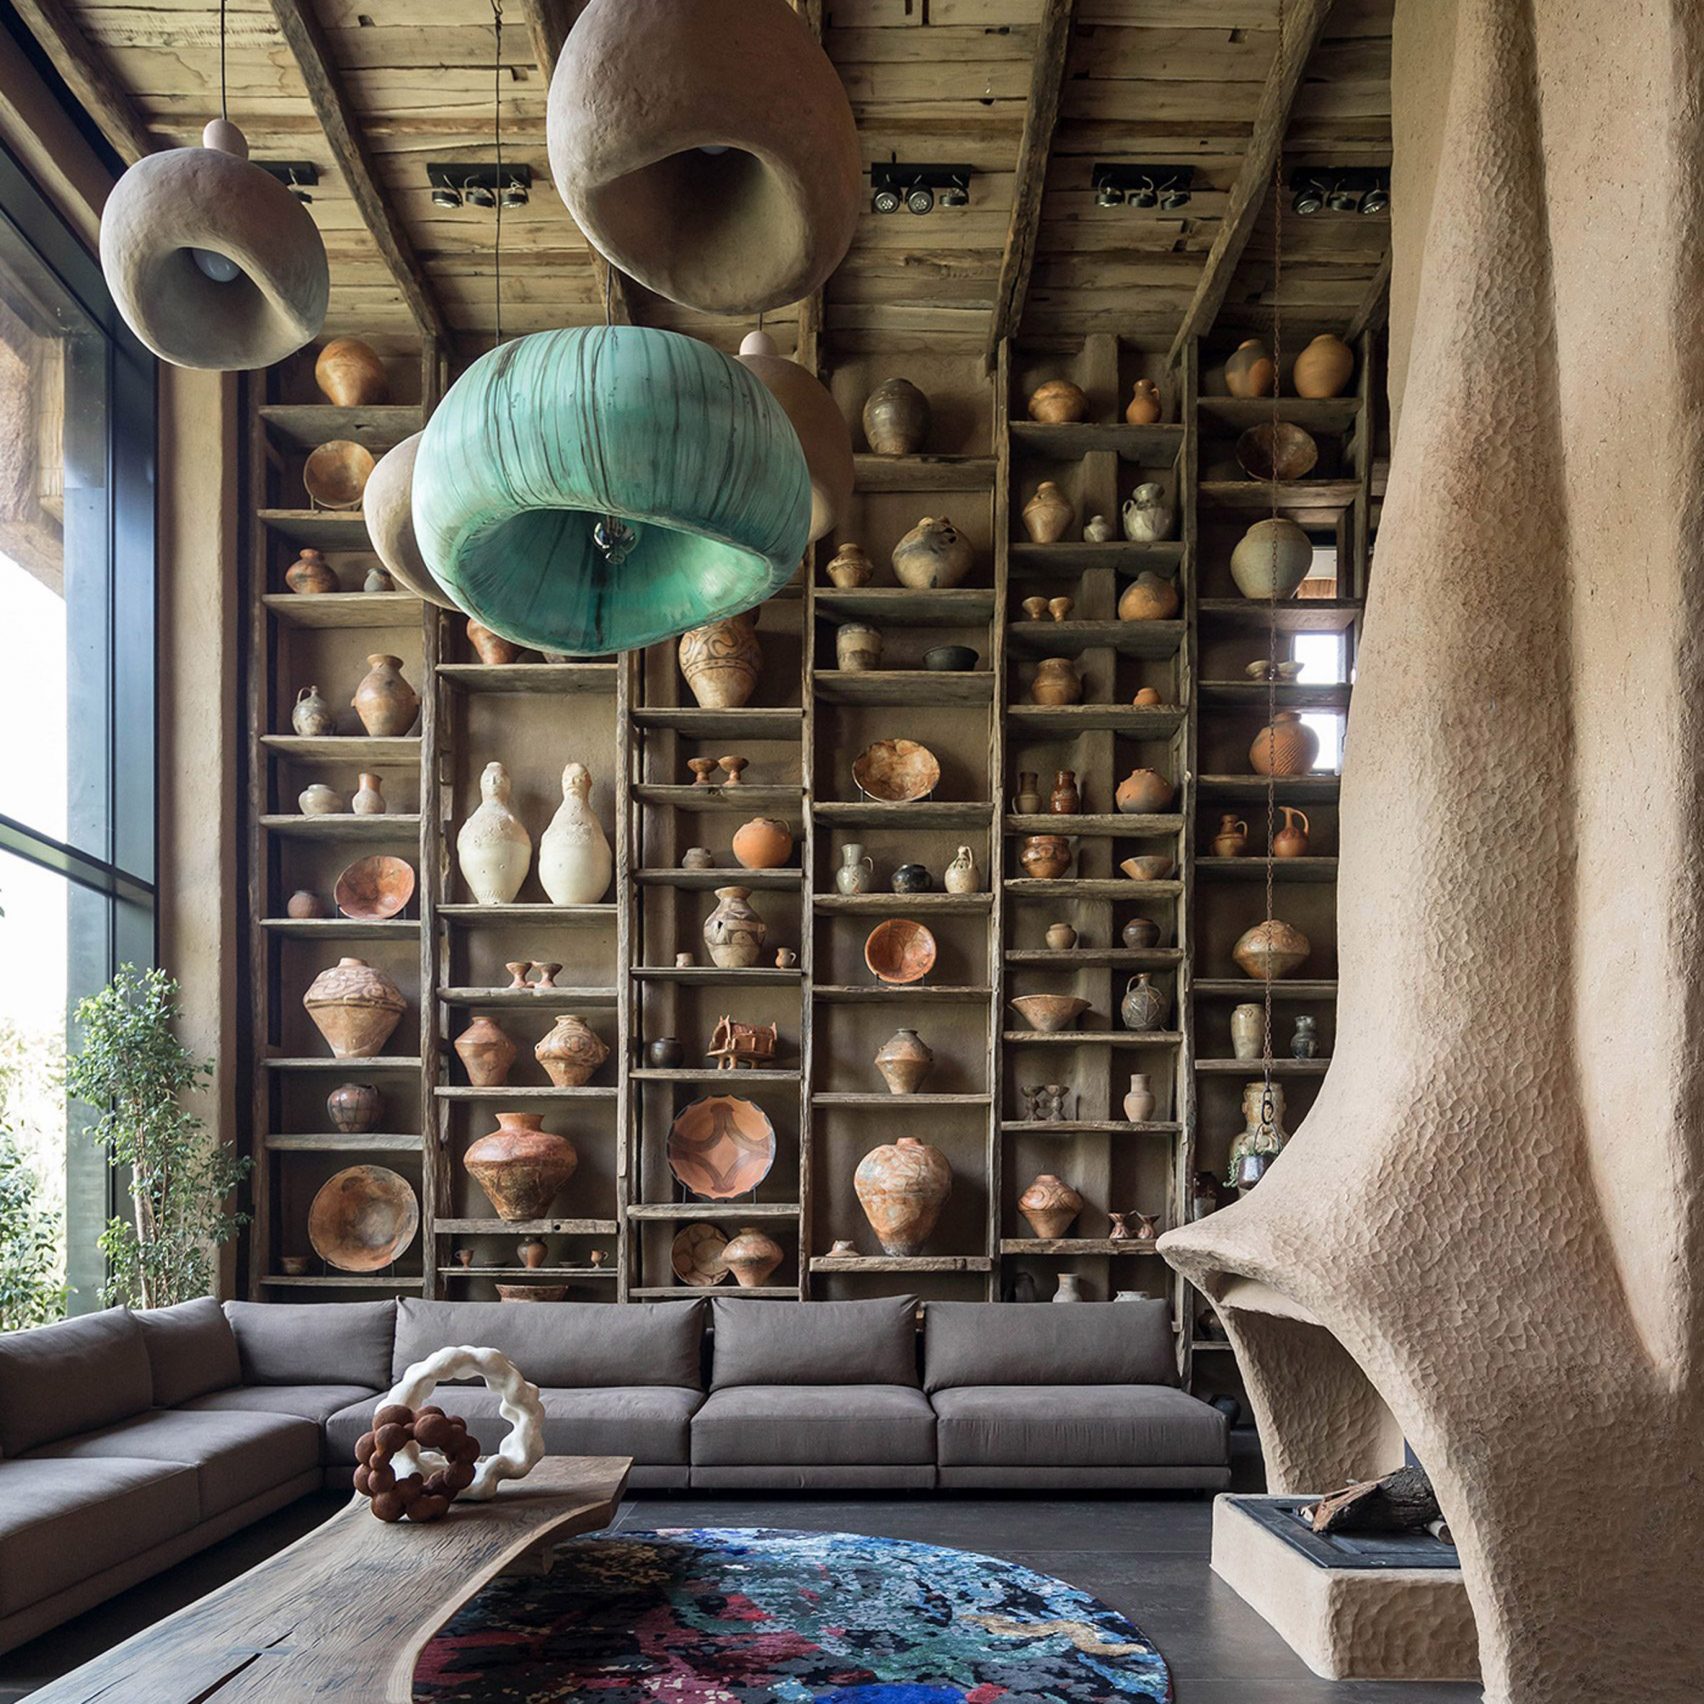 Image of a home with shelving filled with ceramics